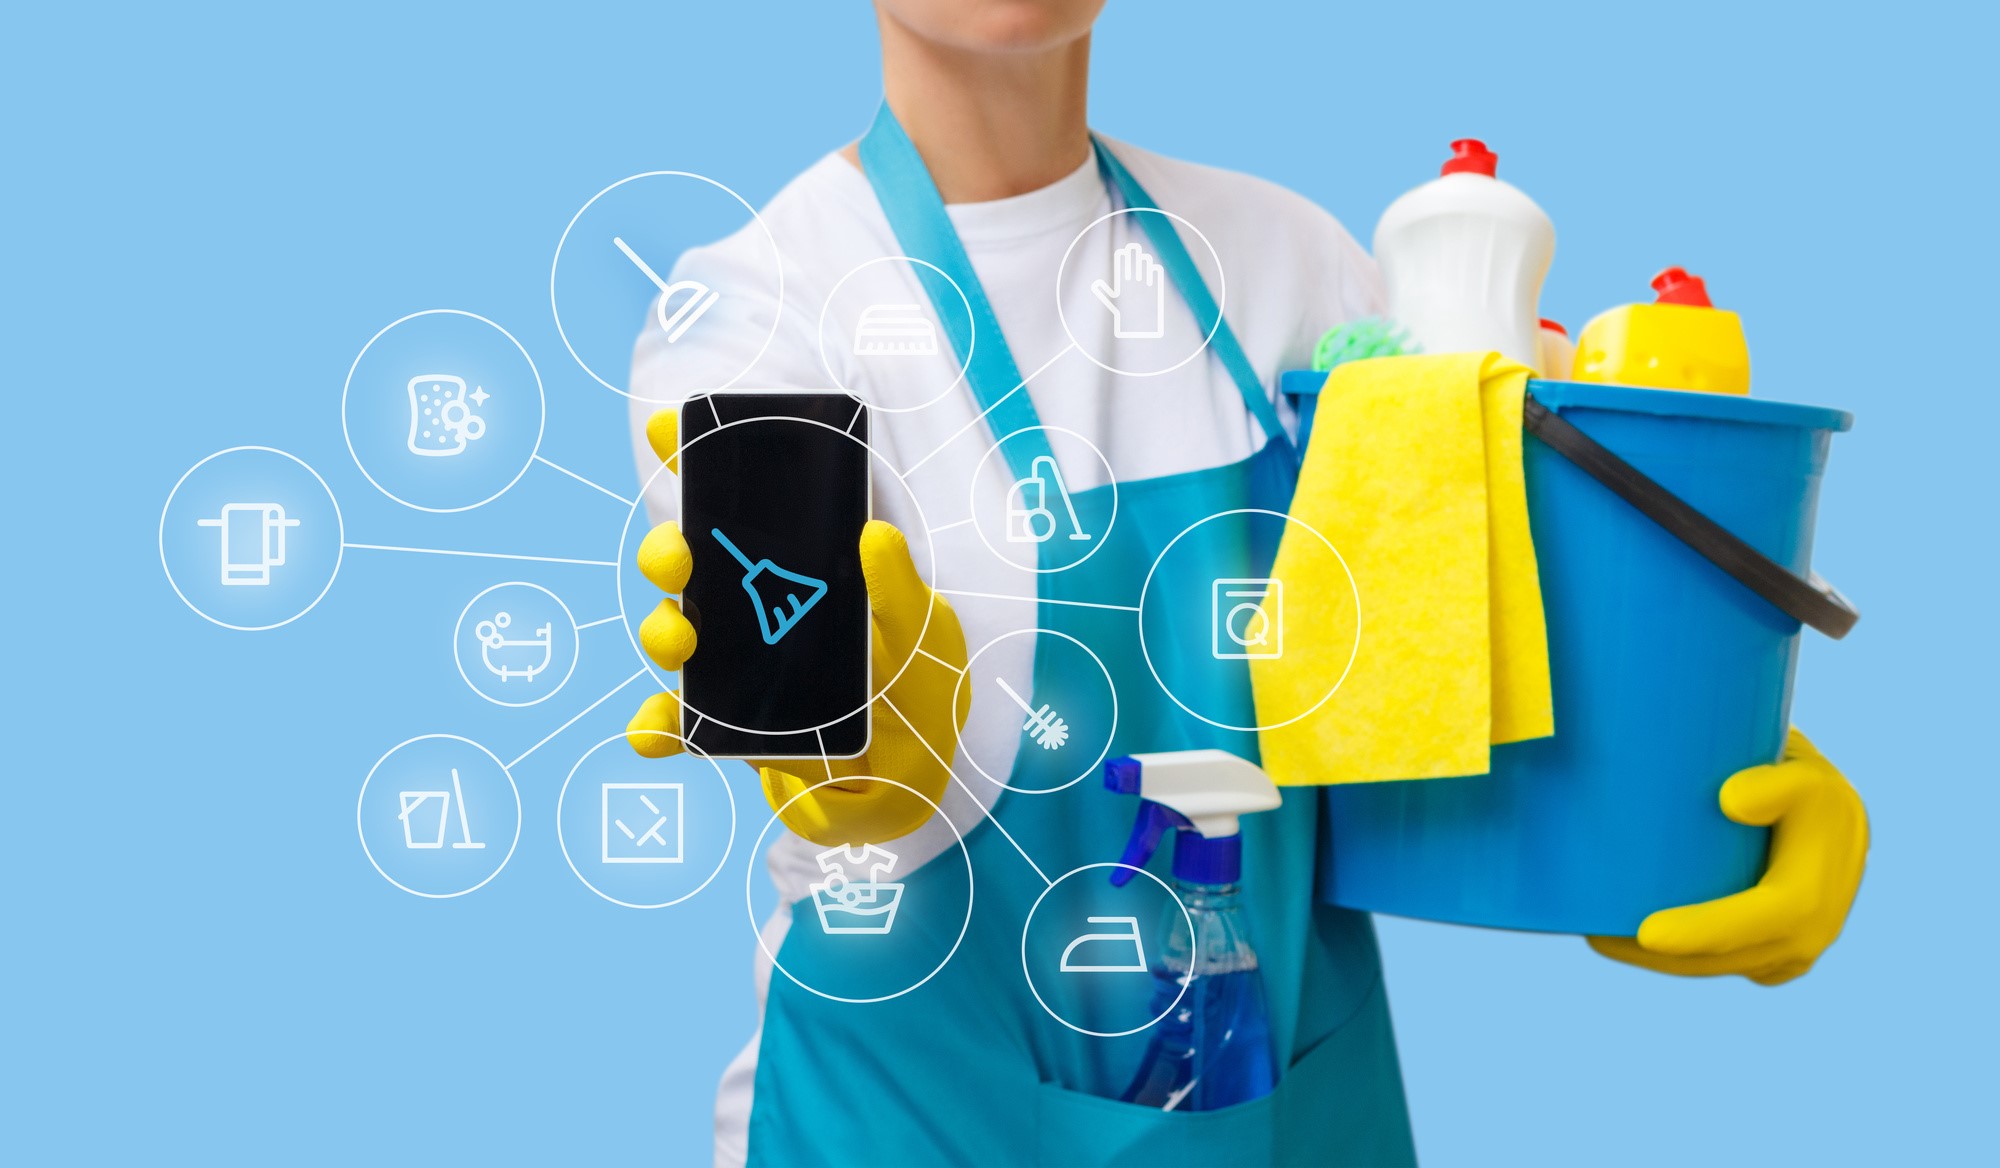 4 Tips for Starting a Successful Cleaning Business